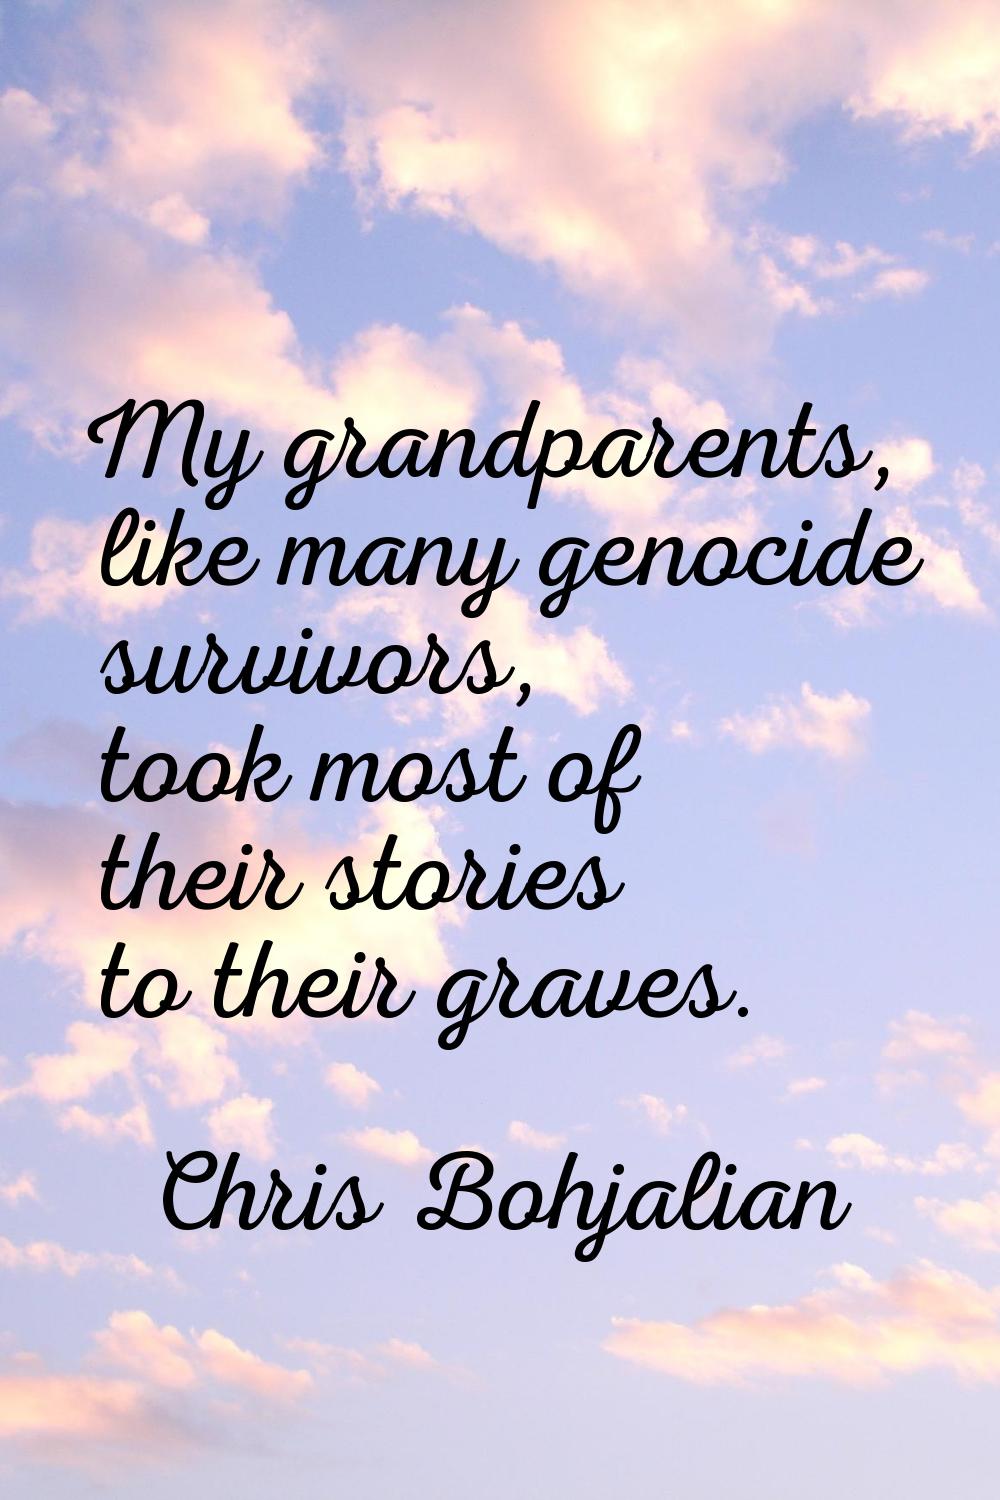 My grandparents, like many genocide survivors, took most of their stories to their graves.